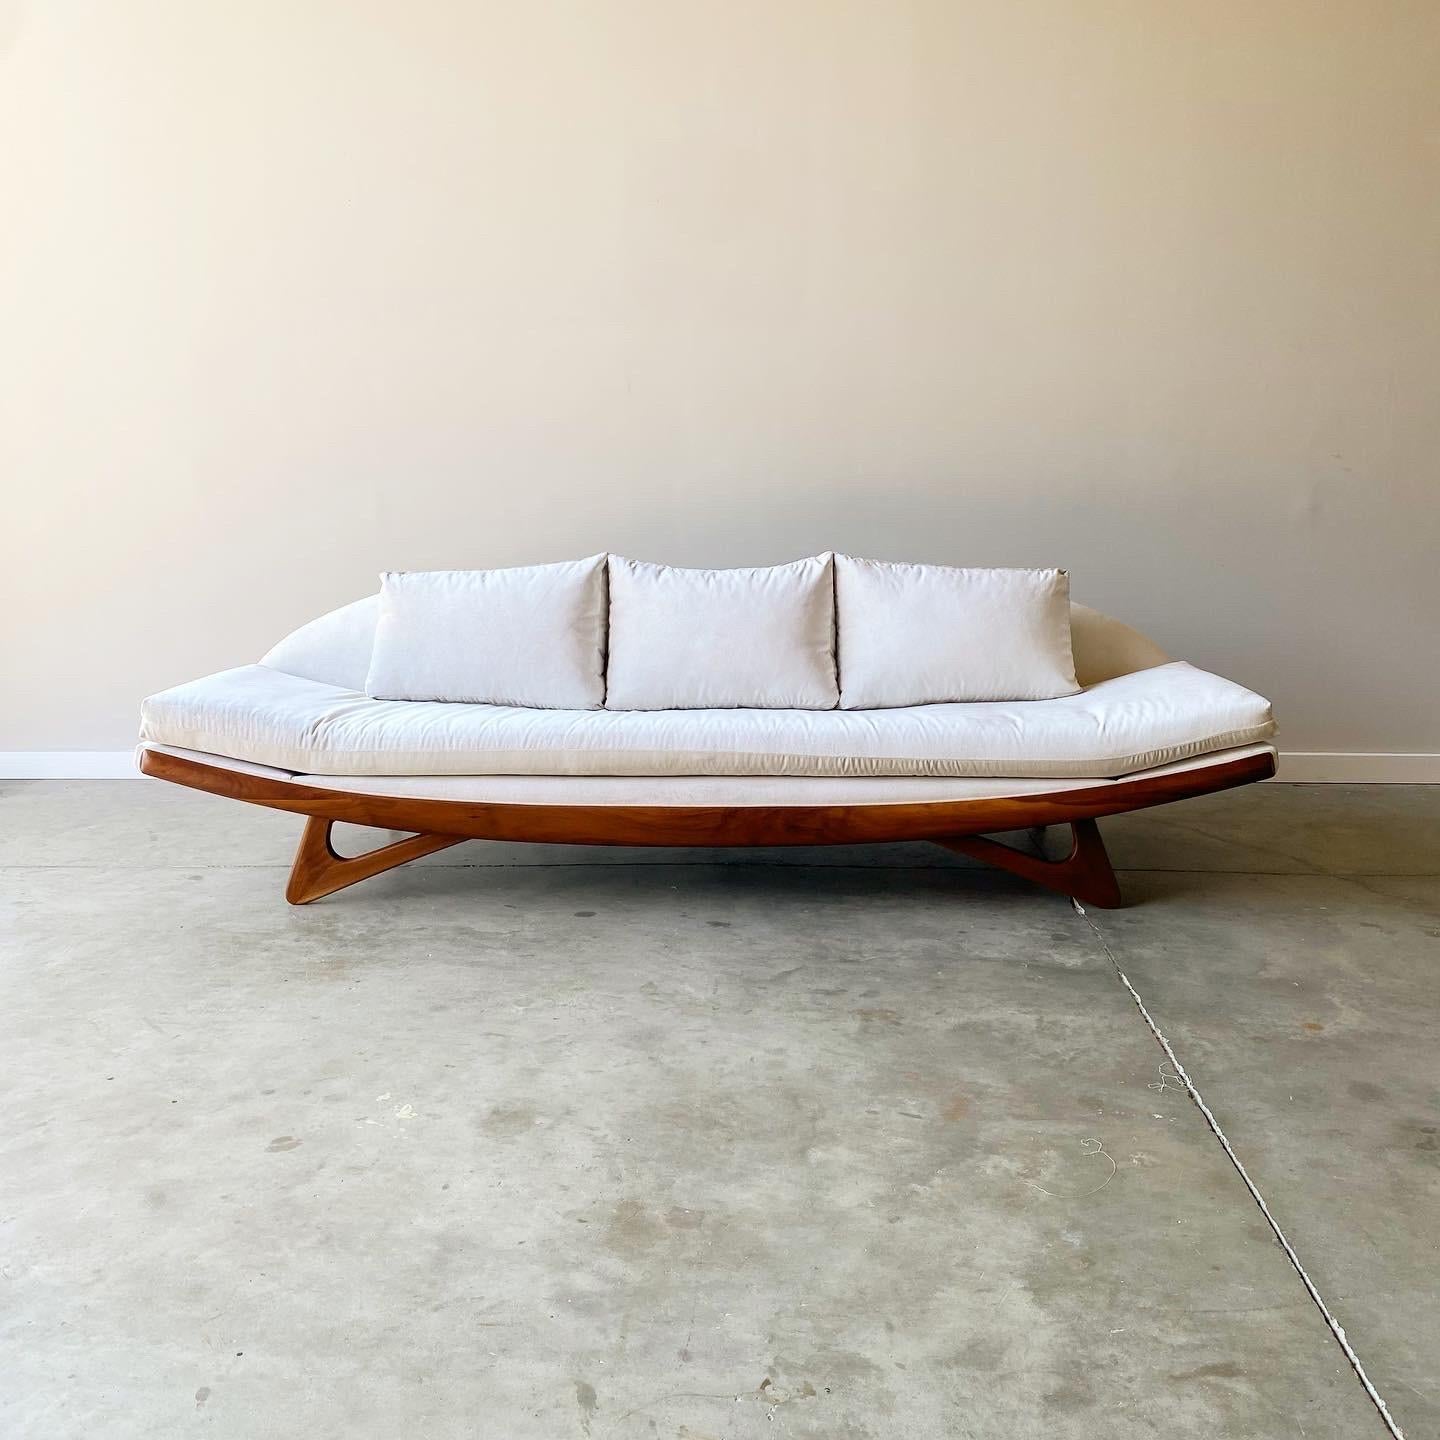 A stunning gondola form sofa from Adrian Pearsall, Craft Associates.  Newly upholstered in an ivory velvet with restored walnut base.  A striking form and sculptural silhouette to this mid-century modern classic.

104